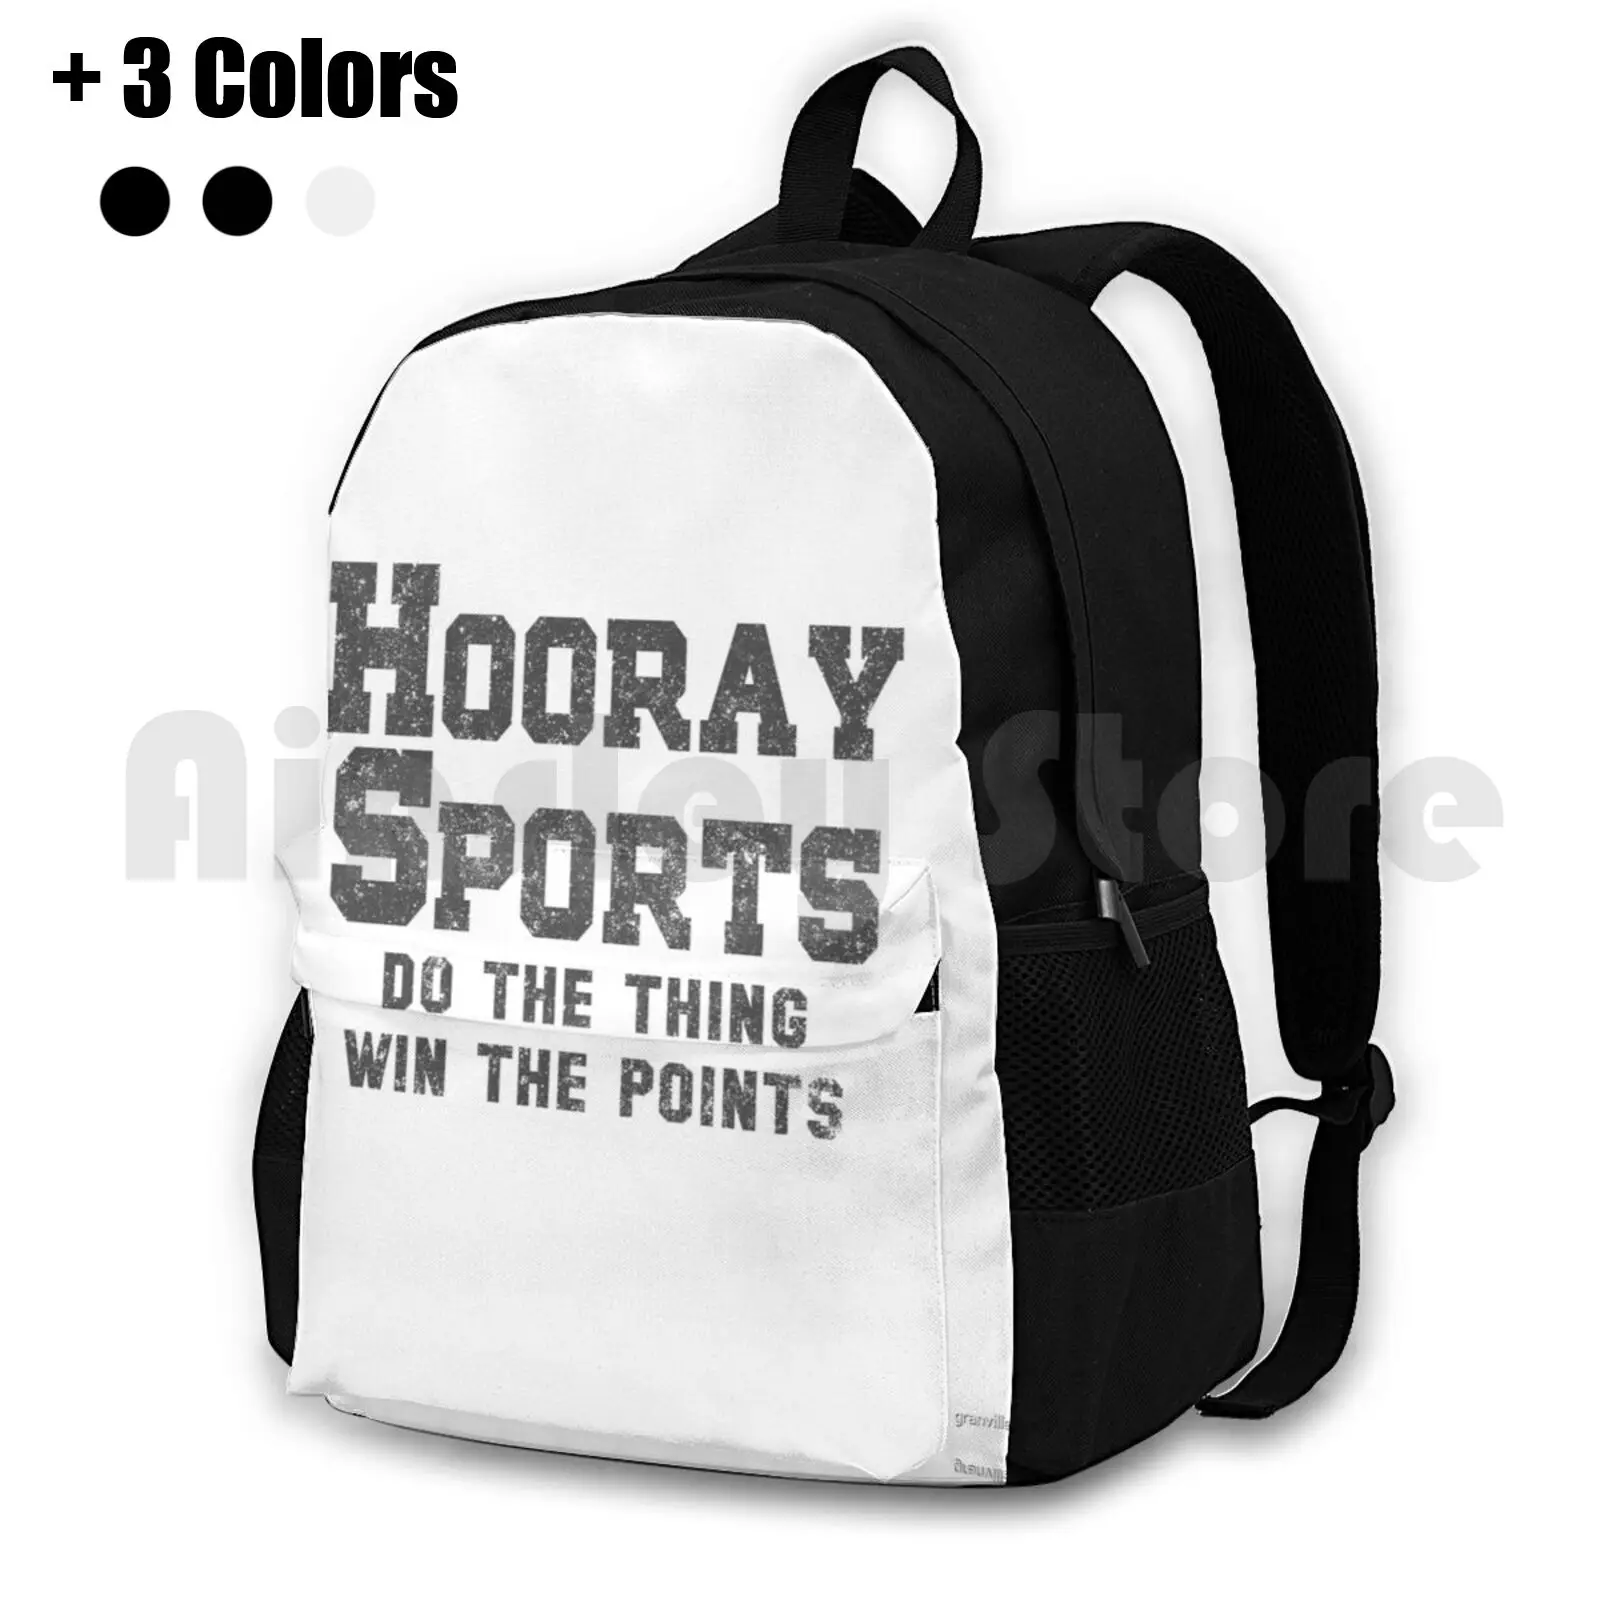 

Hooray Sports Do The Thing Win The Points Outdoor Hiking Backpack Riding Climbing Sports Bag Sports Fan Sports Player Athlete